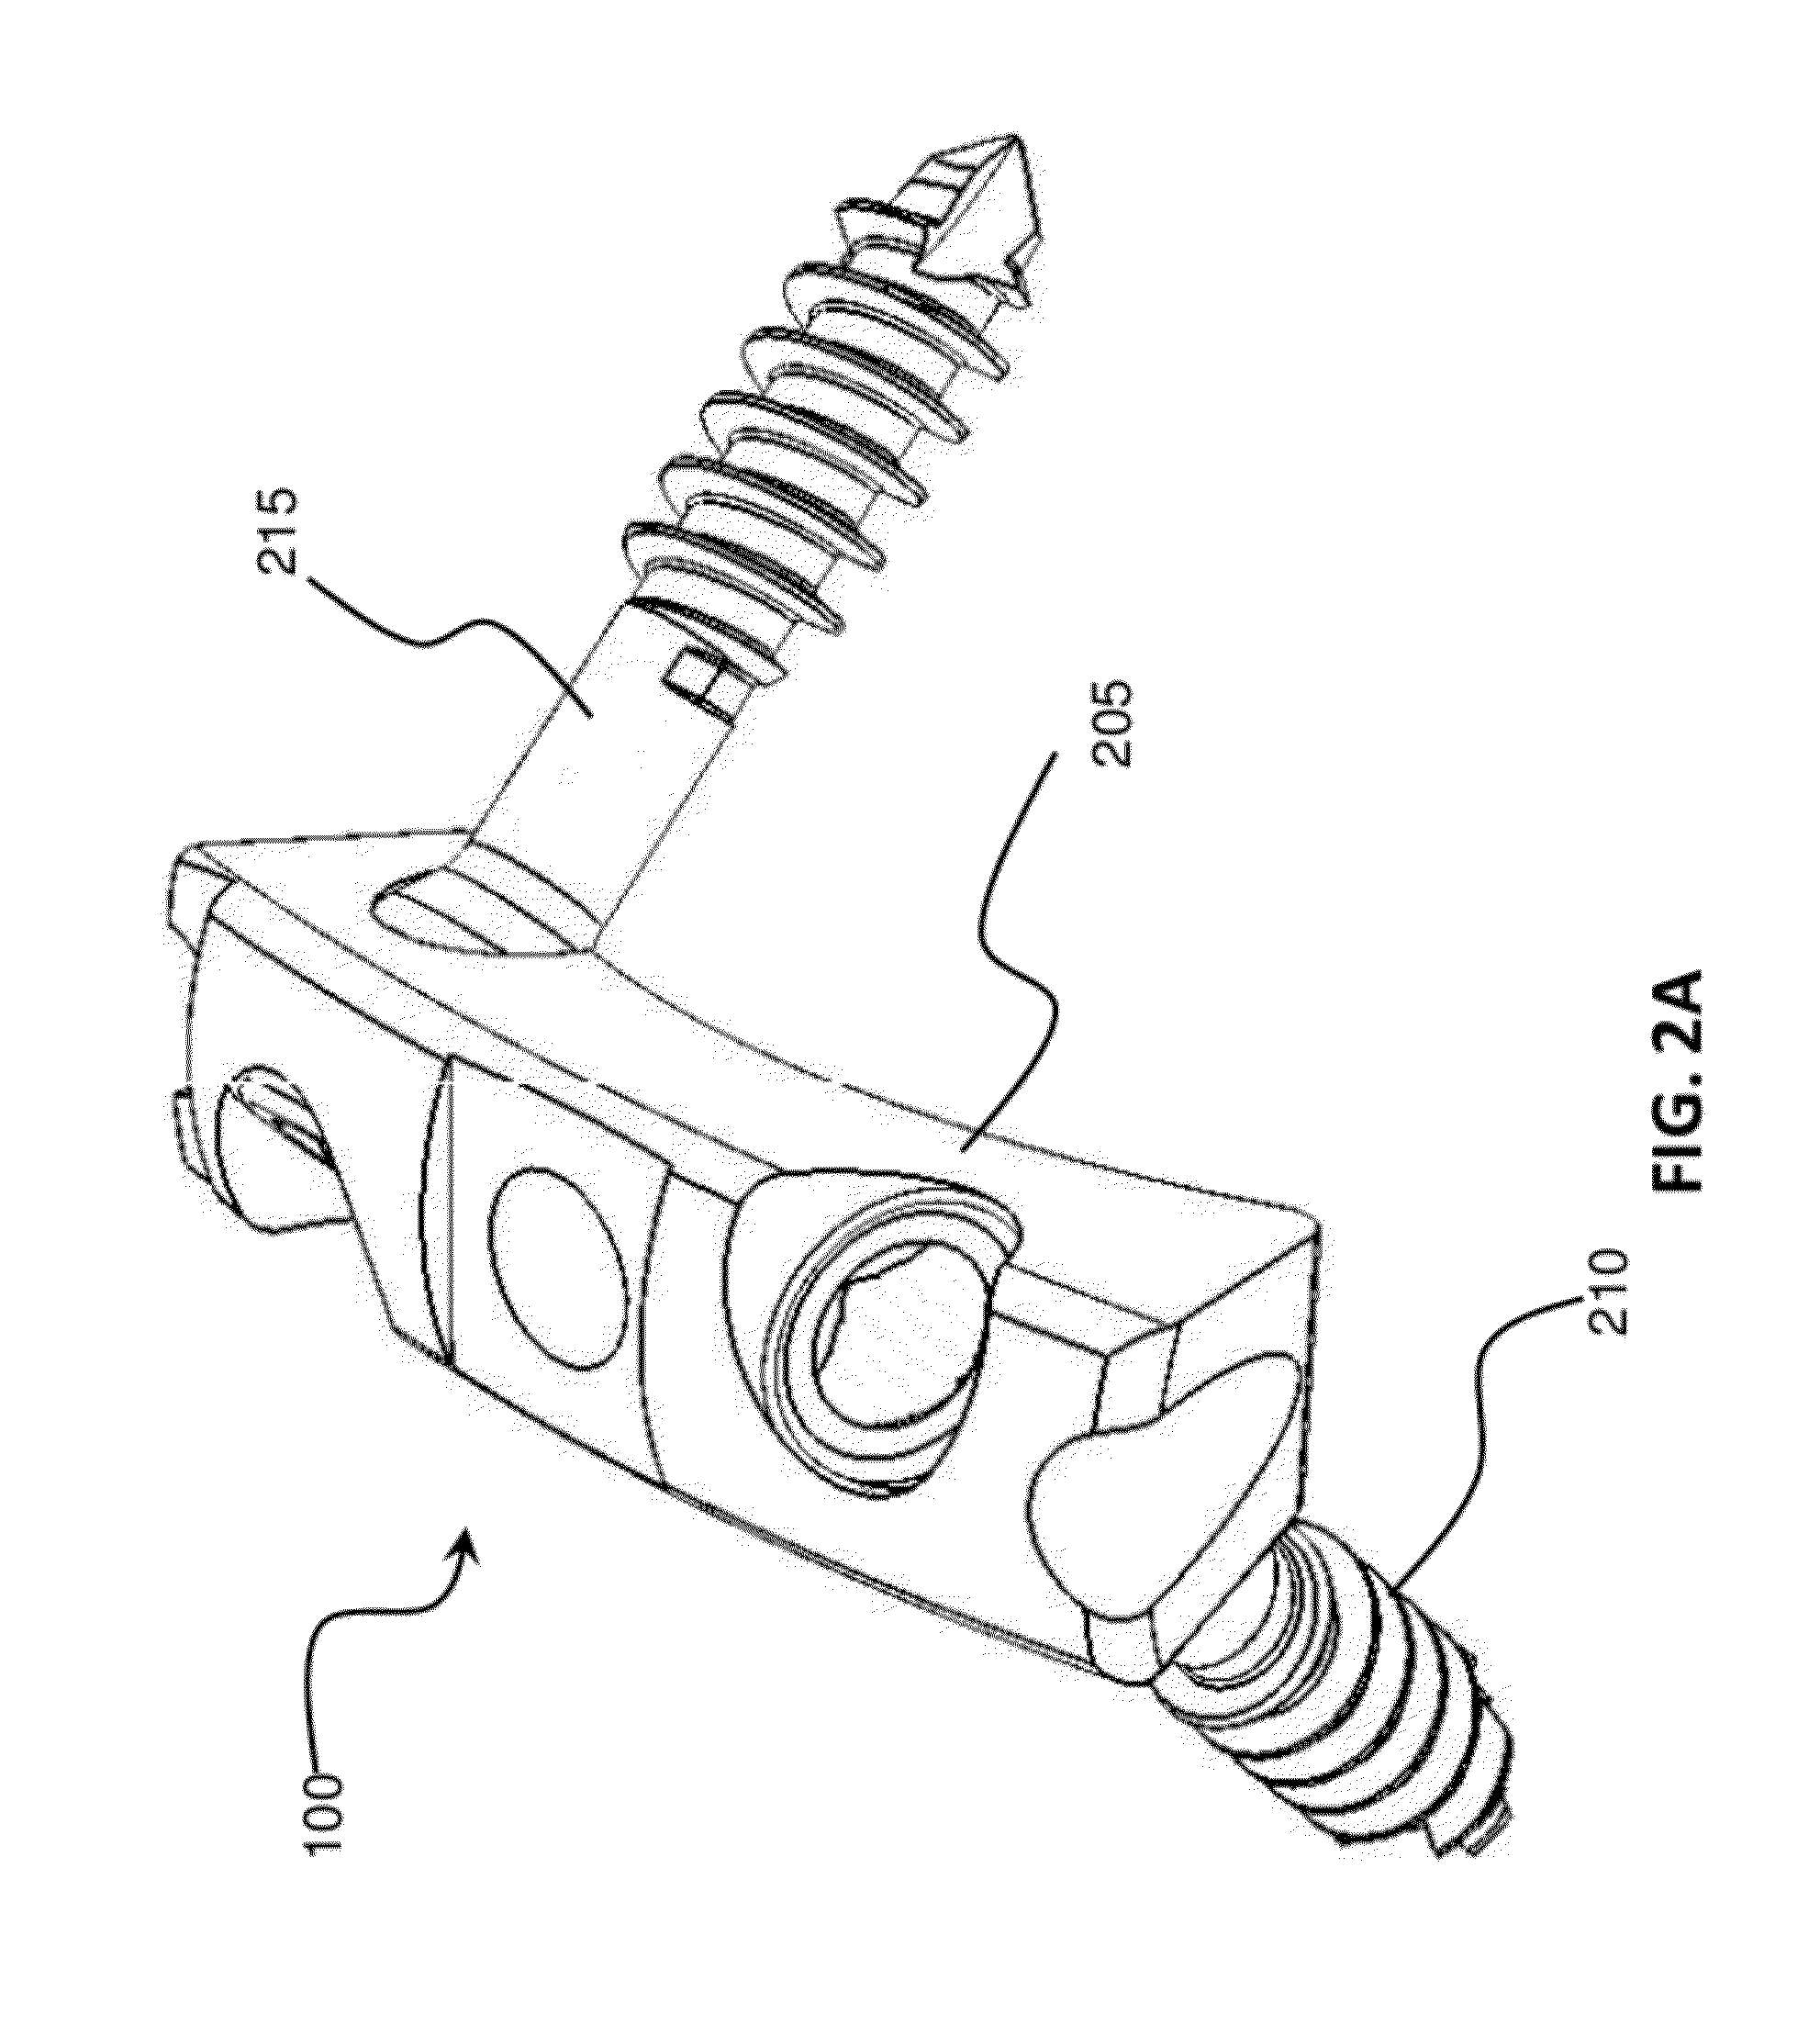 Intraosseous fixation assembly for an osteotomy and method of use